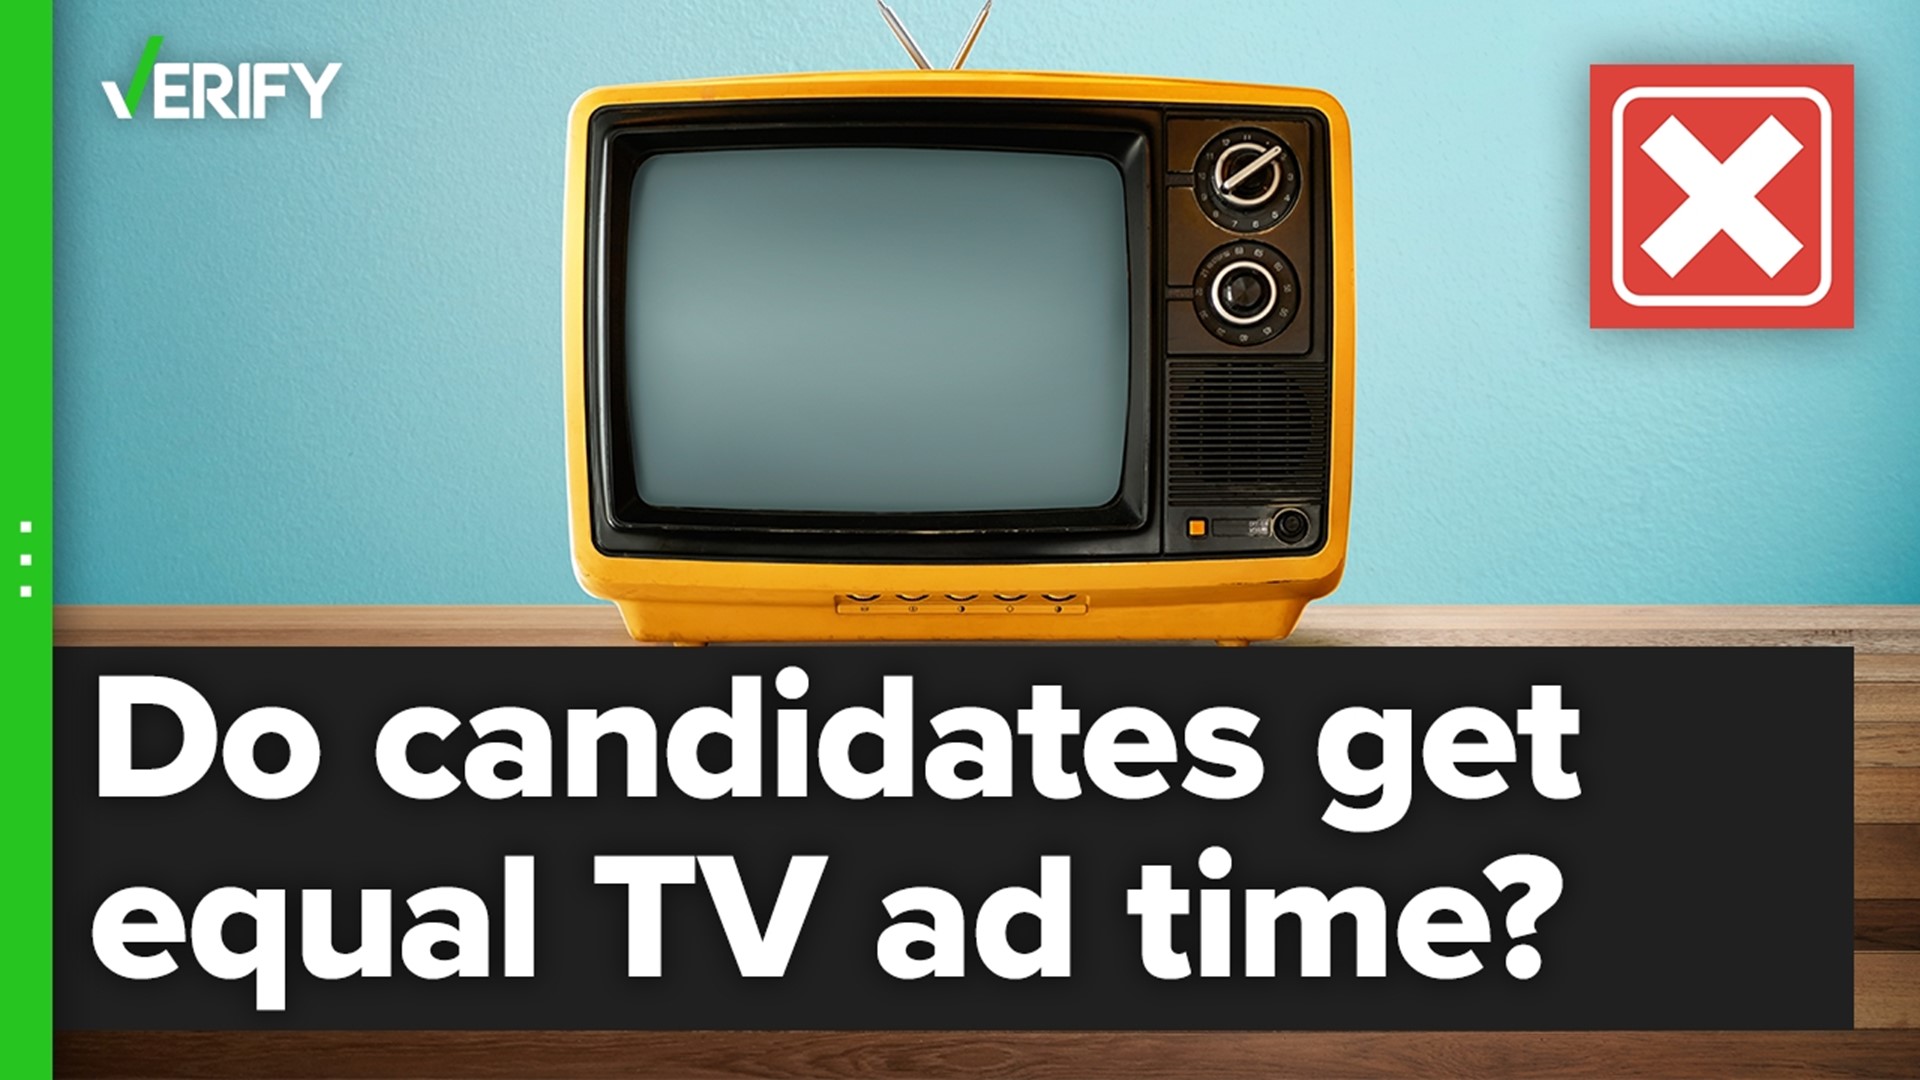 Candidates are not guaranteed equal amounts of TV ad time.